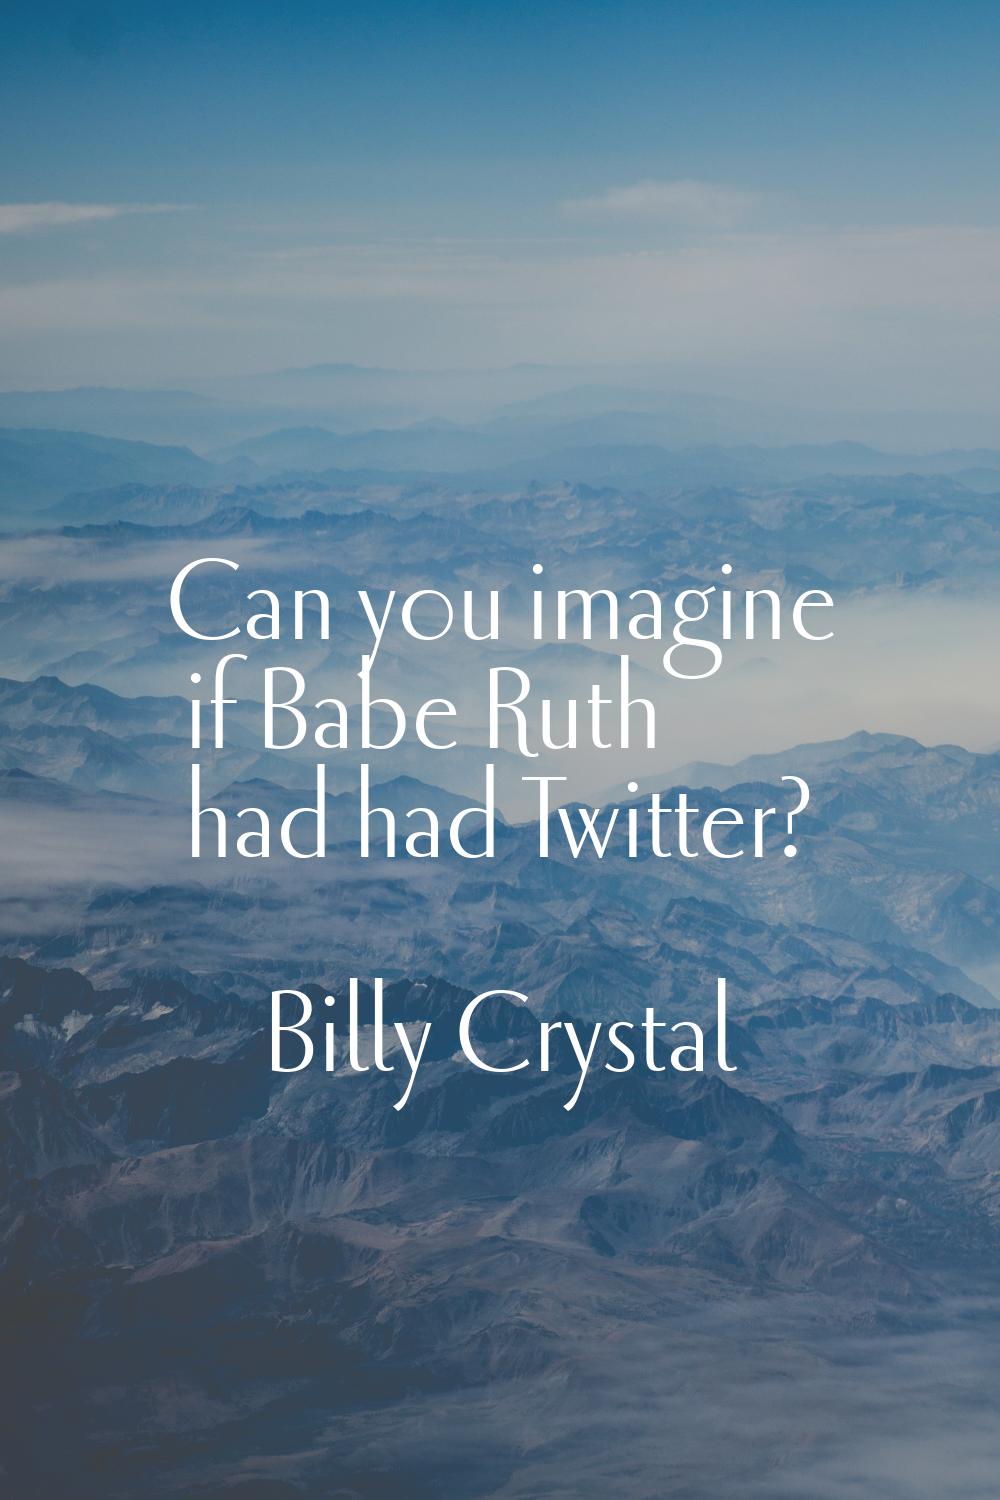 Can you imagine if Babe Ruth had had Twitter?